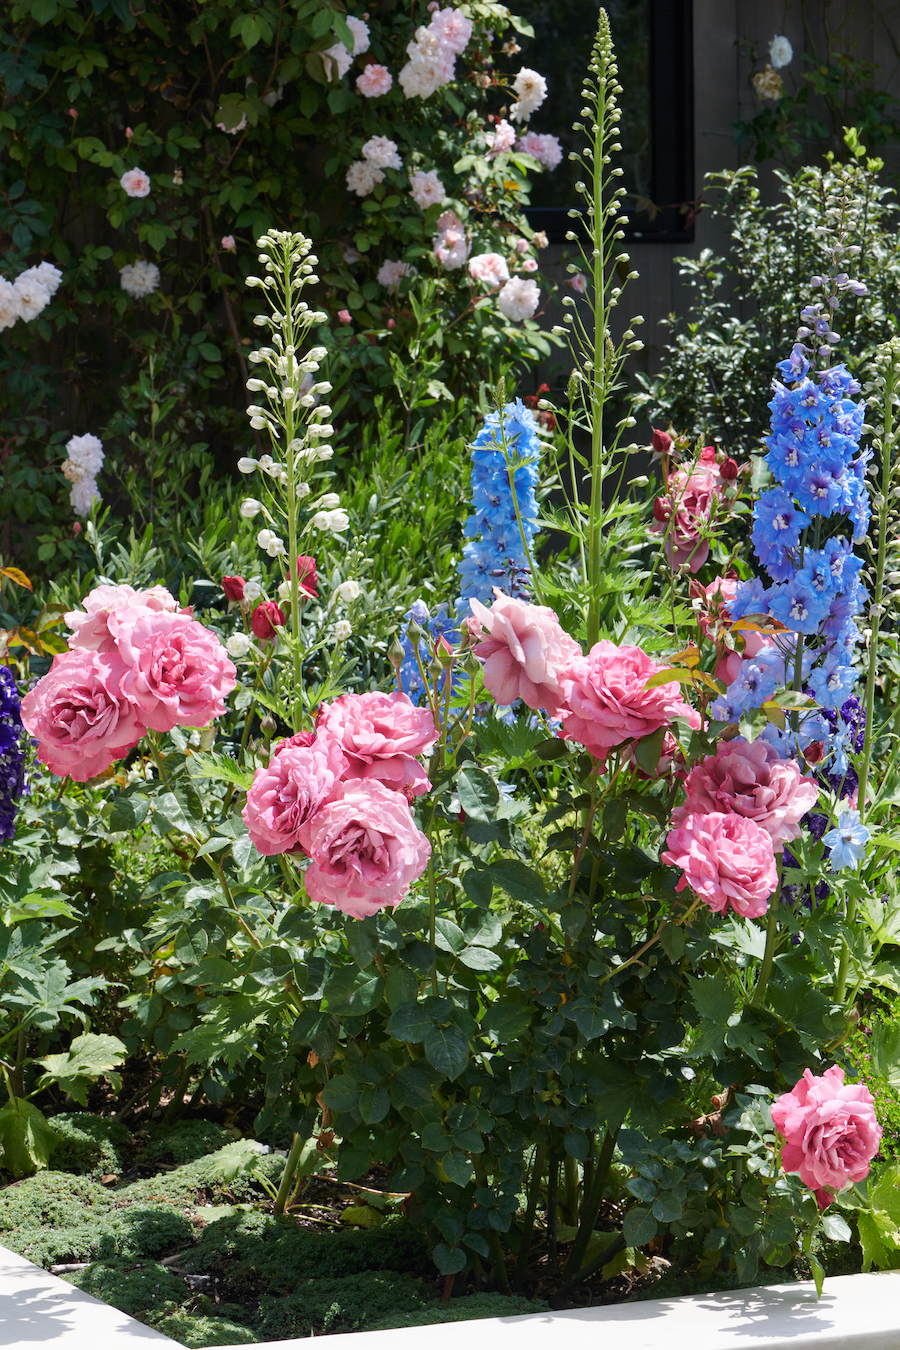 pink roses, light blue flowers and small white flowers in garden